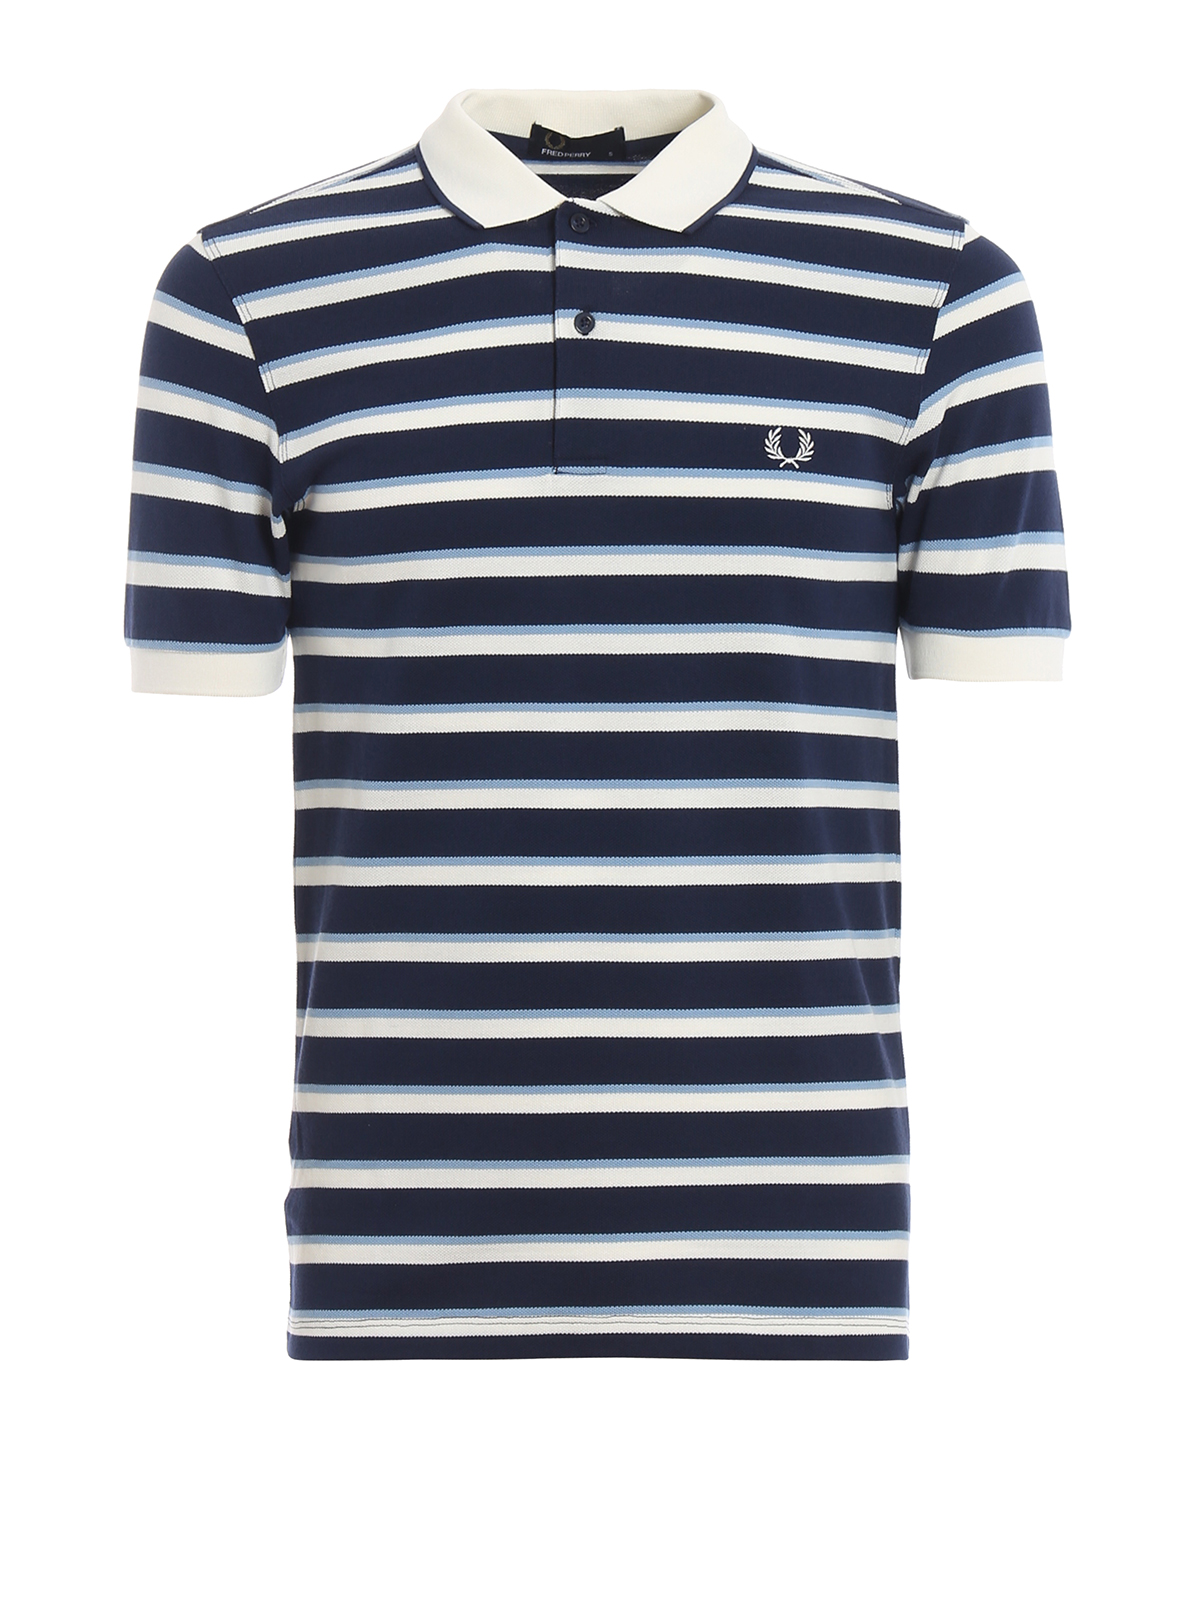 Buy > original fred perry polo shirts > in stock